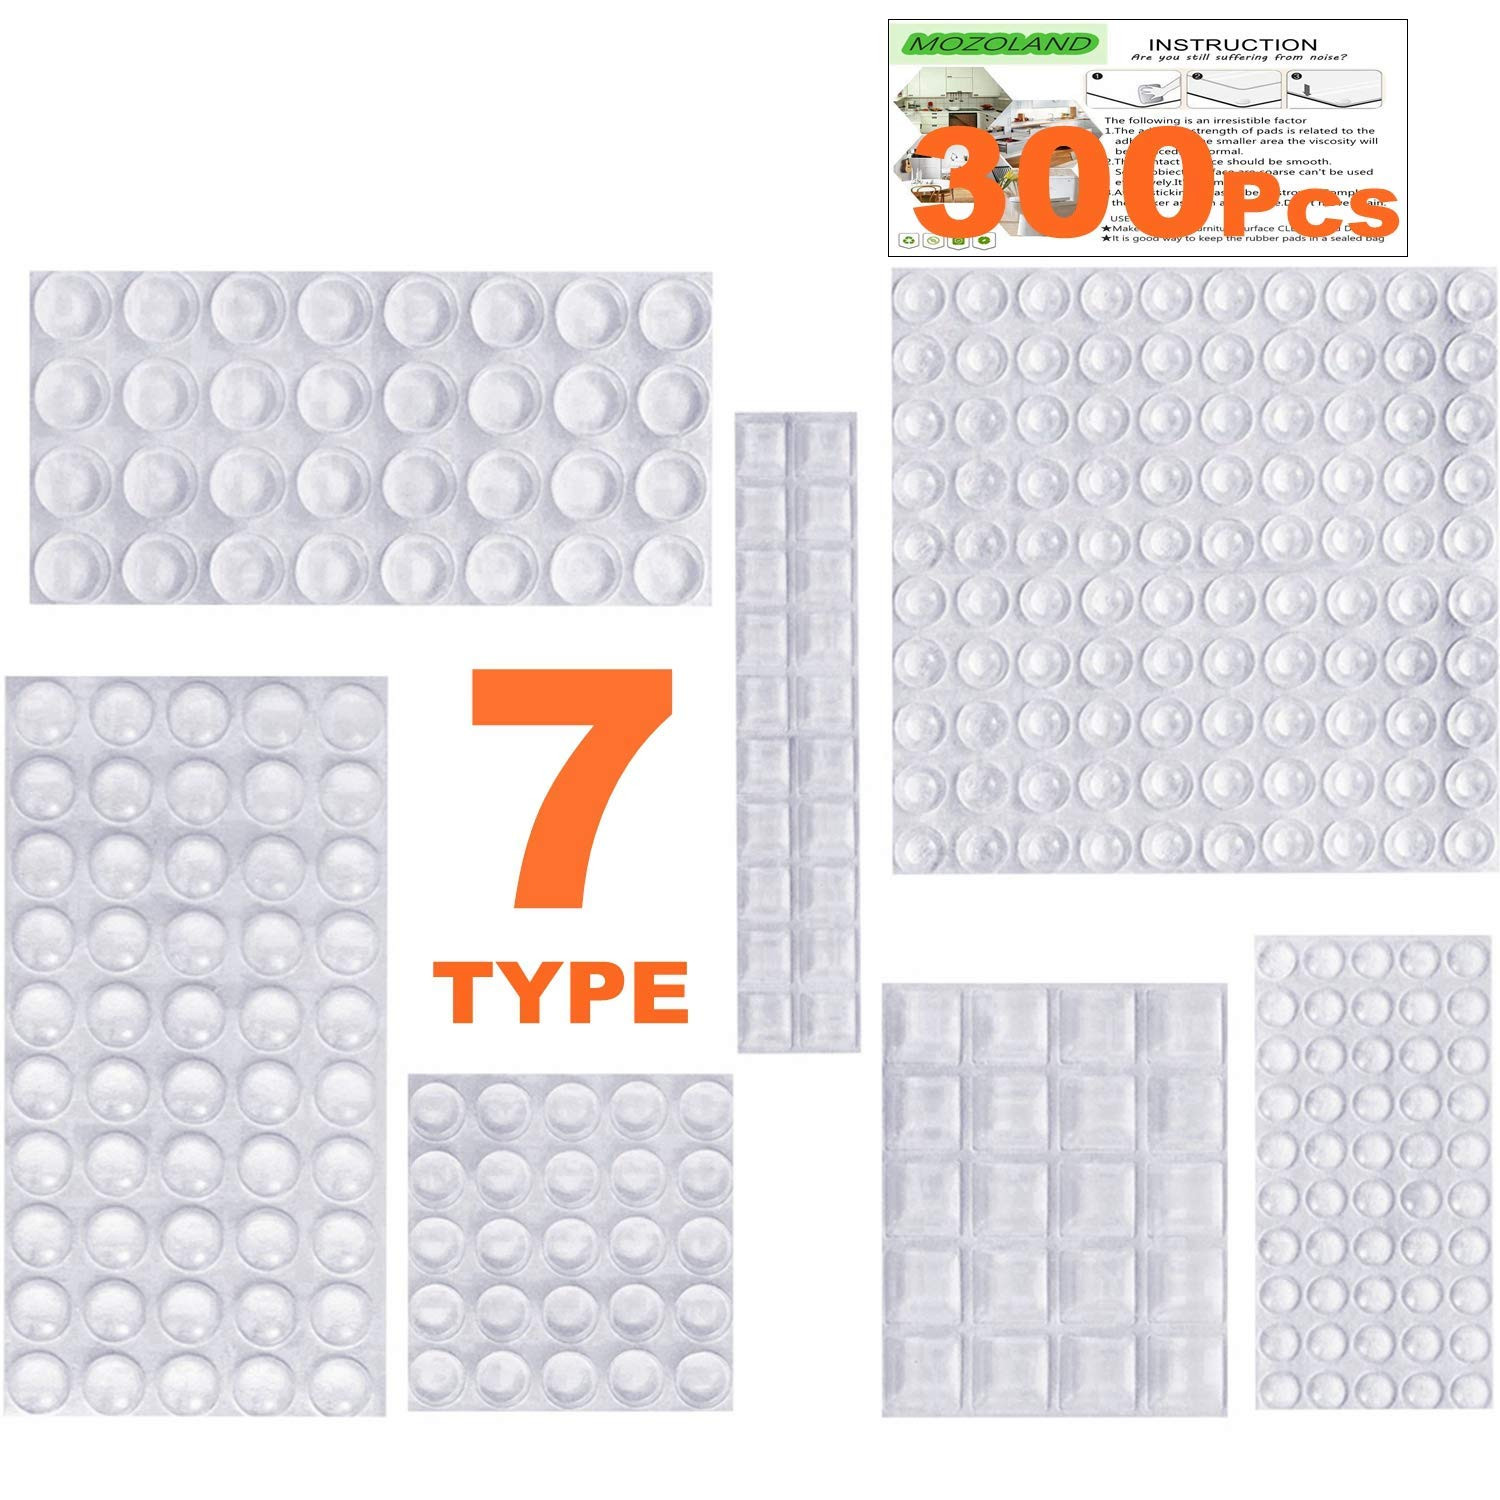 29 Perfect Three Hands Corp Ceramic Vase 2024 free download three hands corp ceramic vase of clear rubber feet bumpers pads 300 pieces self adhesive transparent intended for clear rubber feet bumpers pads 300 pieces self adhesive transparent stick bu